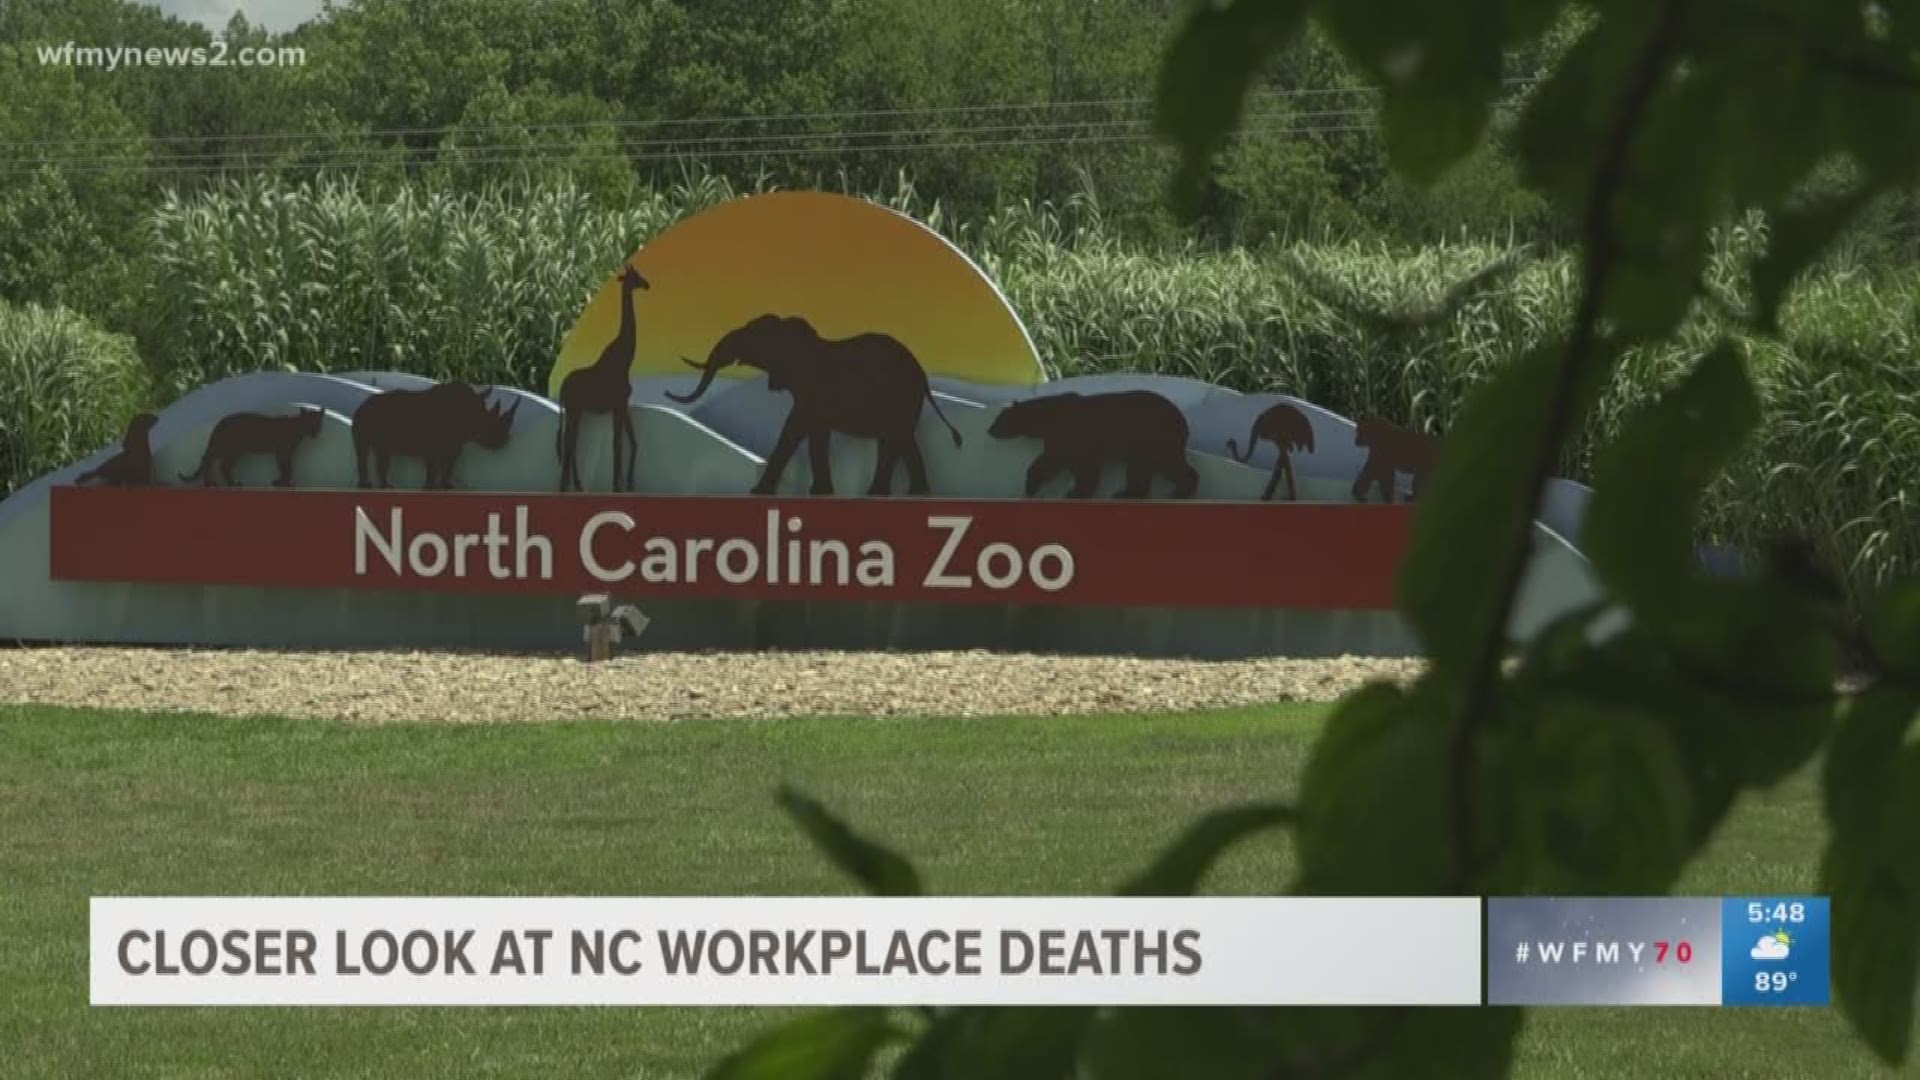 As state officials investigate the death at the North Carolina Zoo, we talked to an expert who says some workplace deaths are preventable.